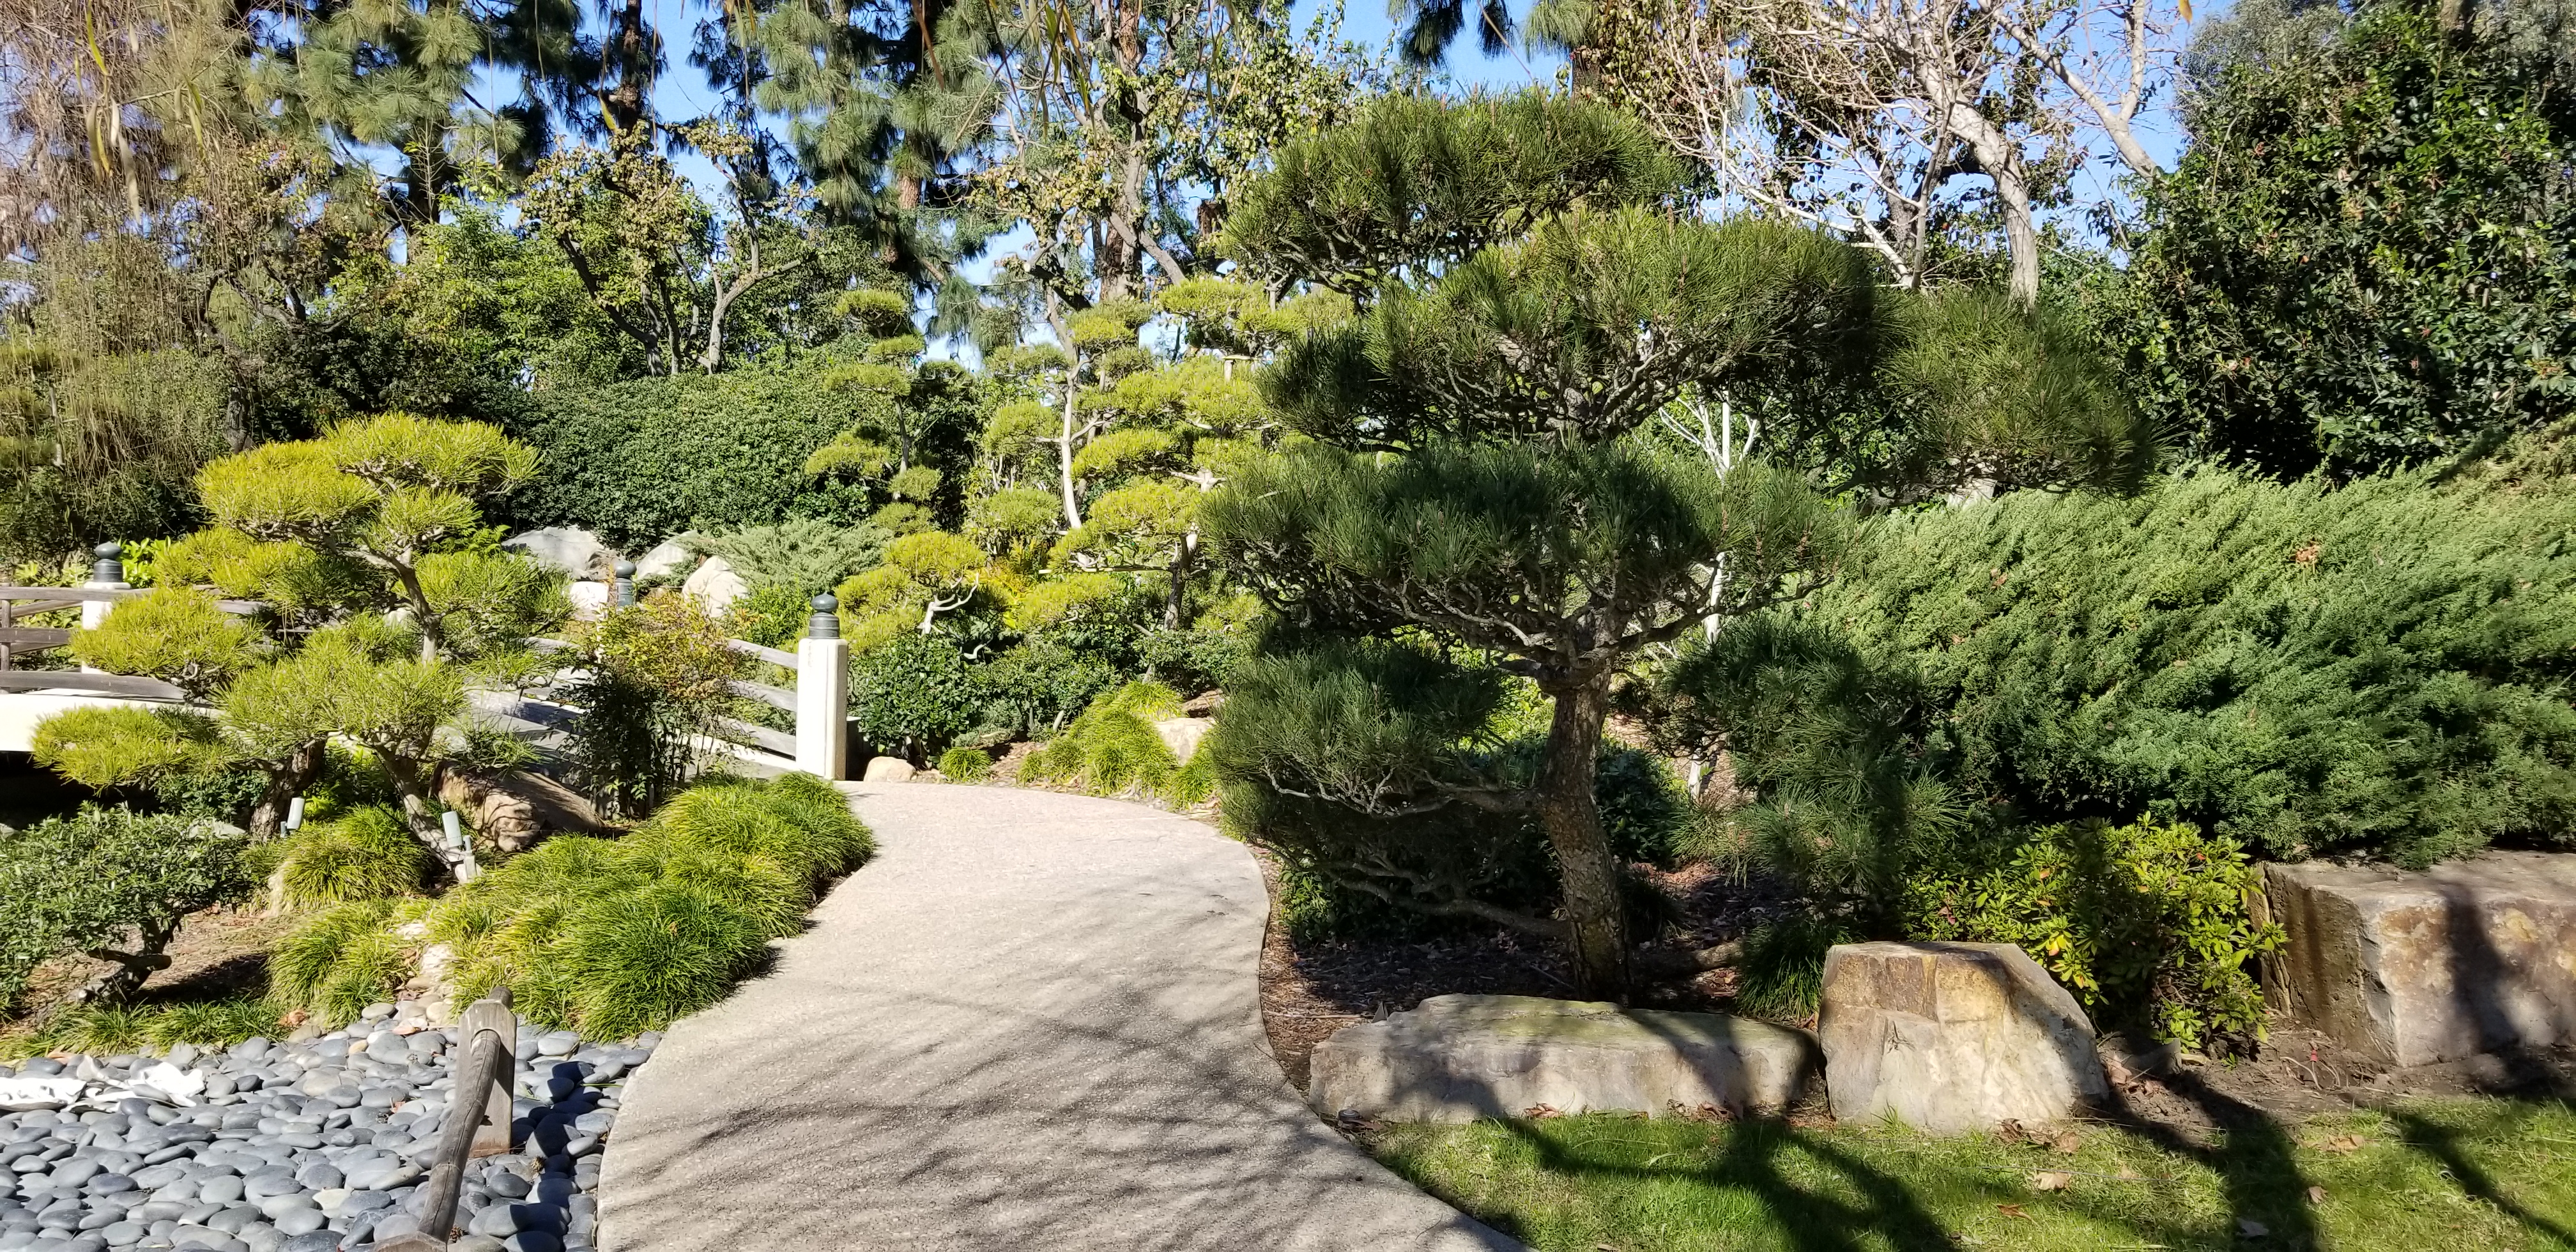 Photo of Japanese black pines in the Garden